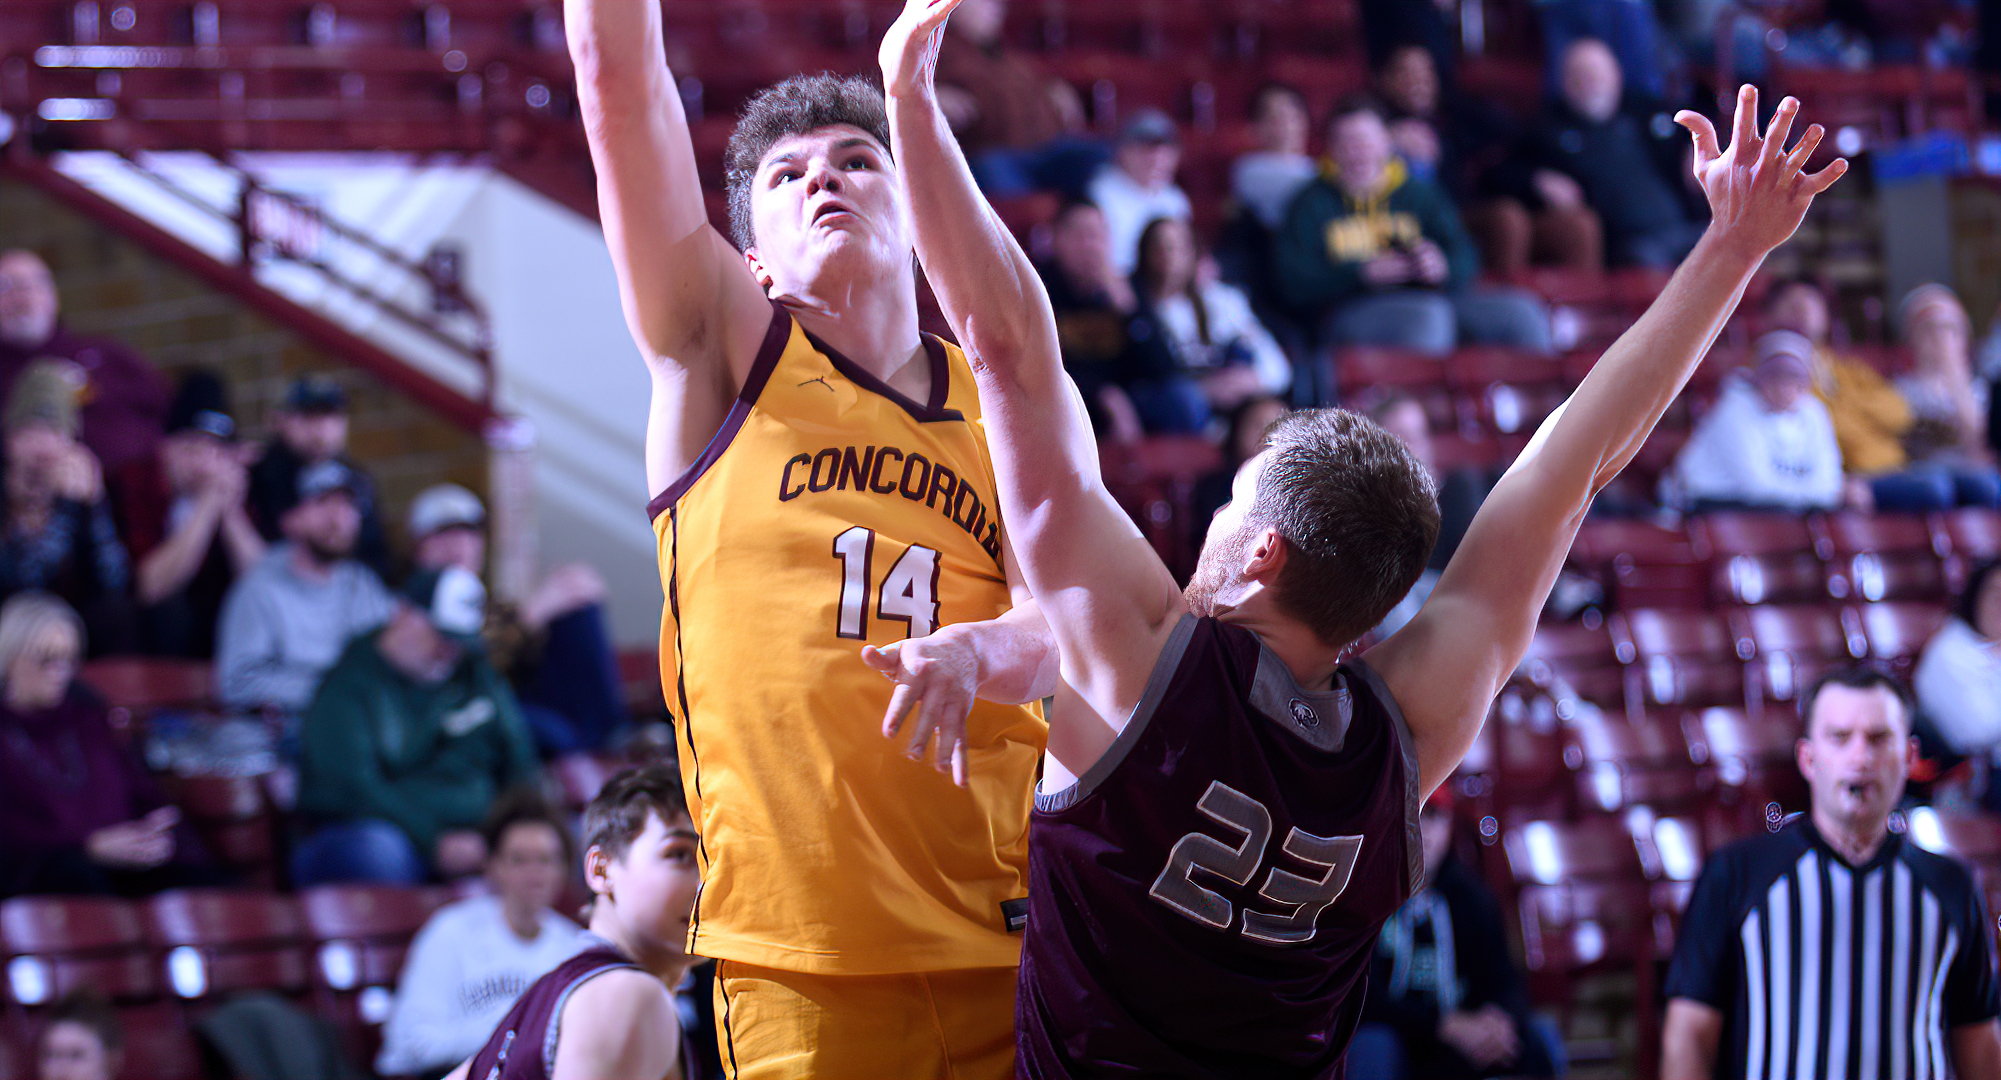 Sophomore Rowan Nelson had game-high totals in points and rebounds as he led the Cobbers to an 84-76 win over Augsburg in Minneapolis.